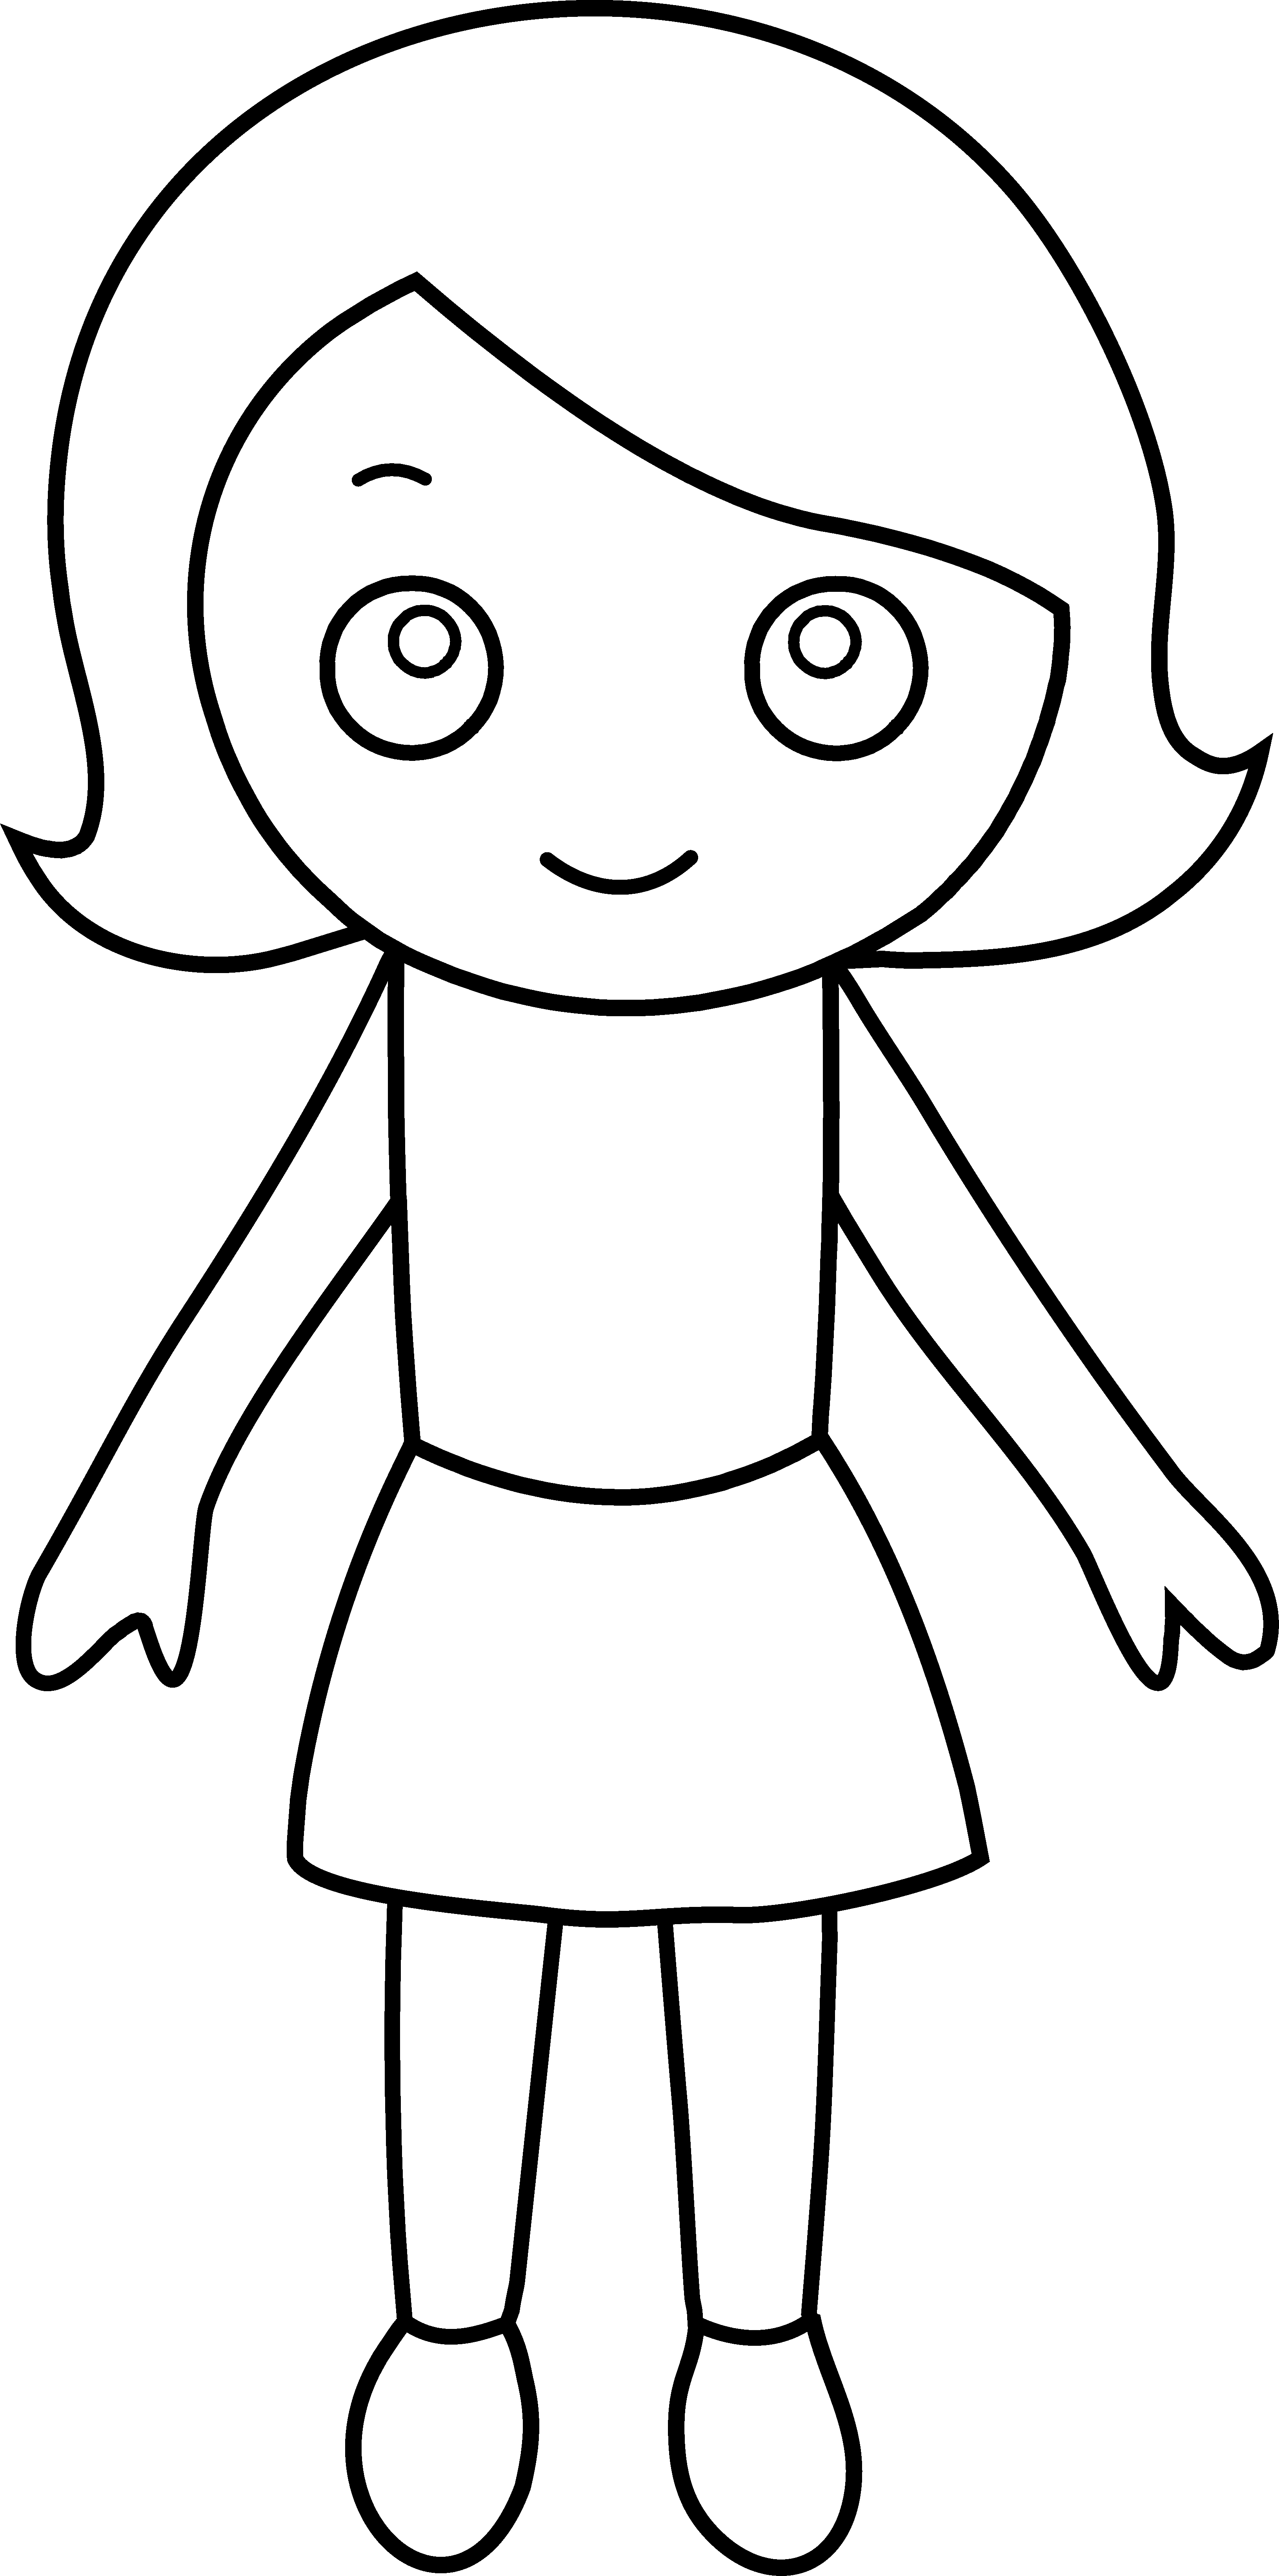 9 Pics of Little Girl Cartoon Coloring Page - Little Girl Drawing ...